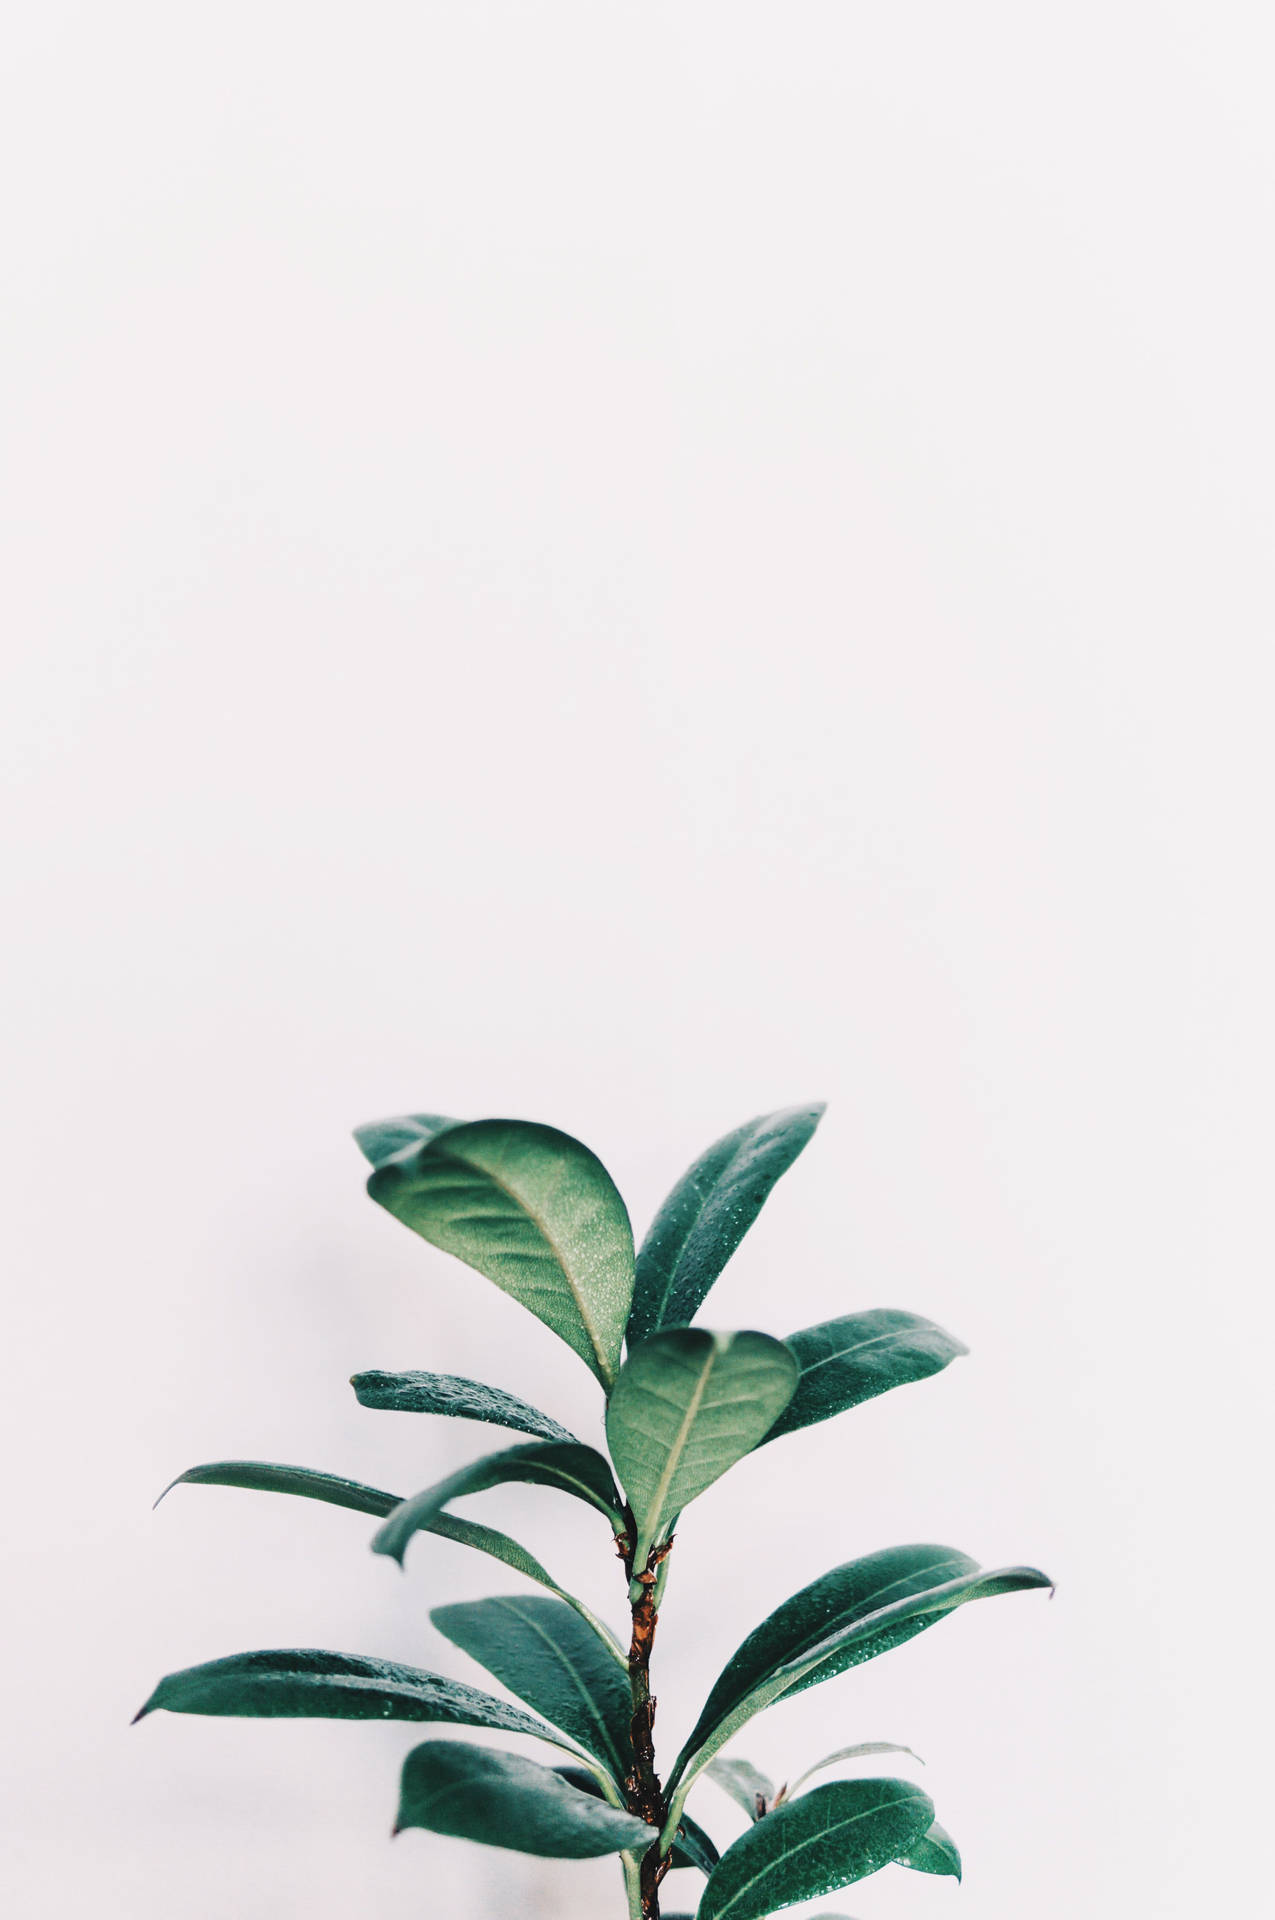 Tranquil White Aesthetic with Green Leaves for iPhone Wallpaper Wallpaper